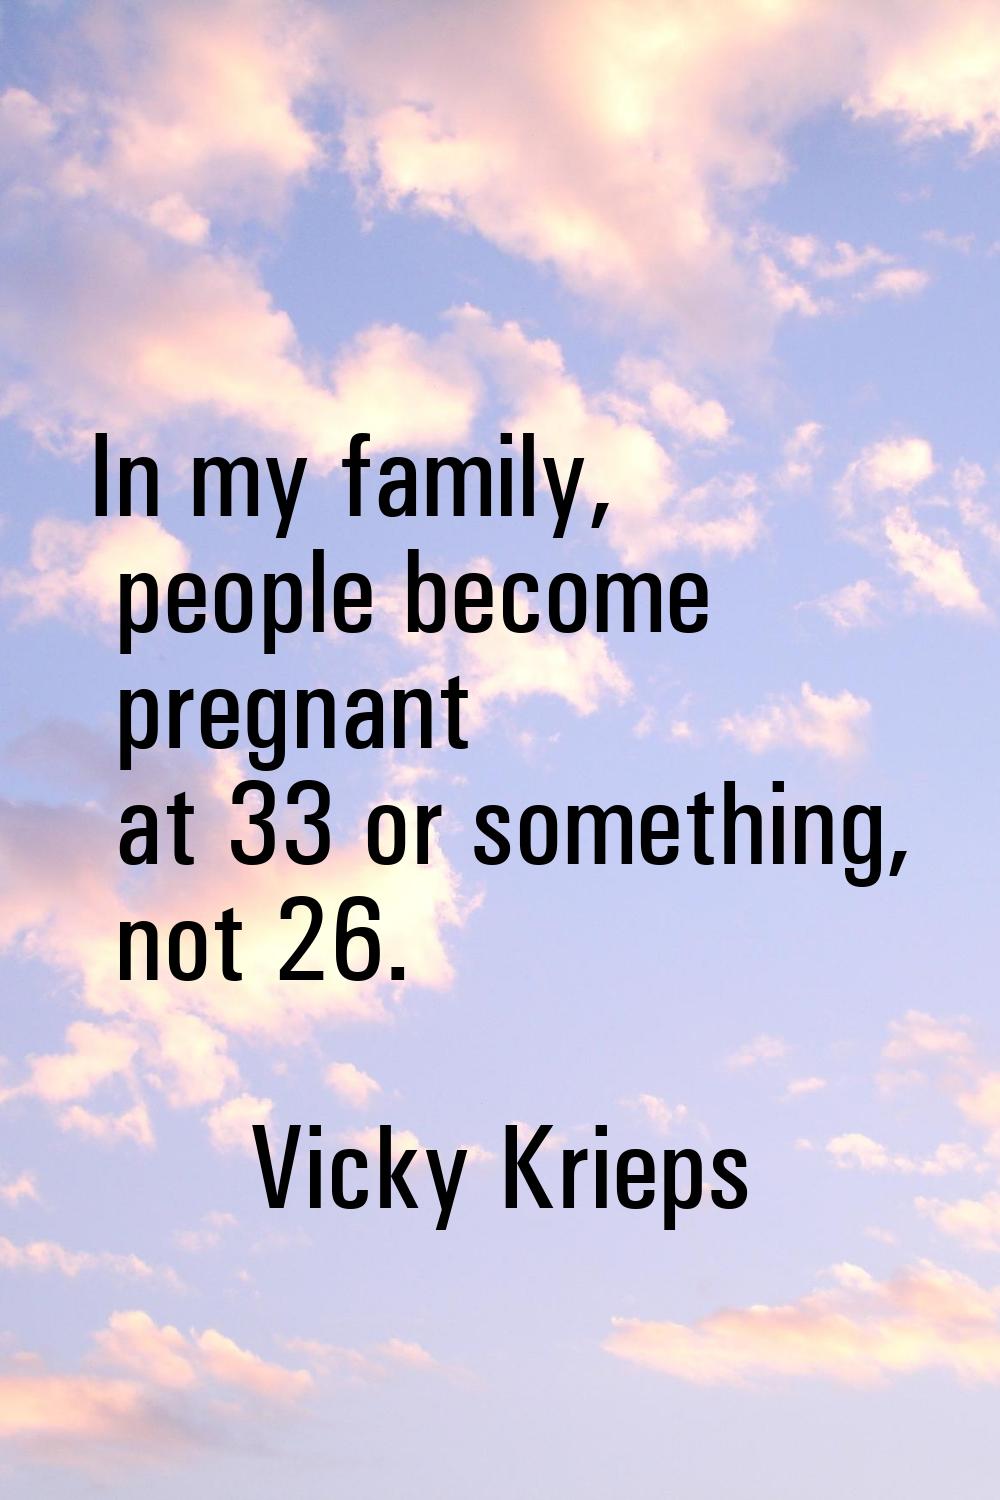 In my family, people become pregnant at 33 or something, not 26.